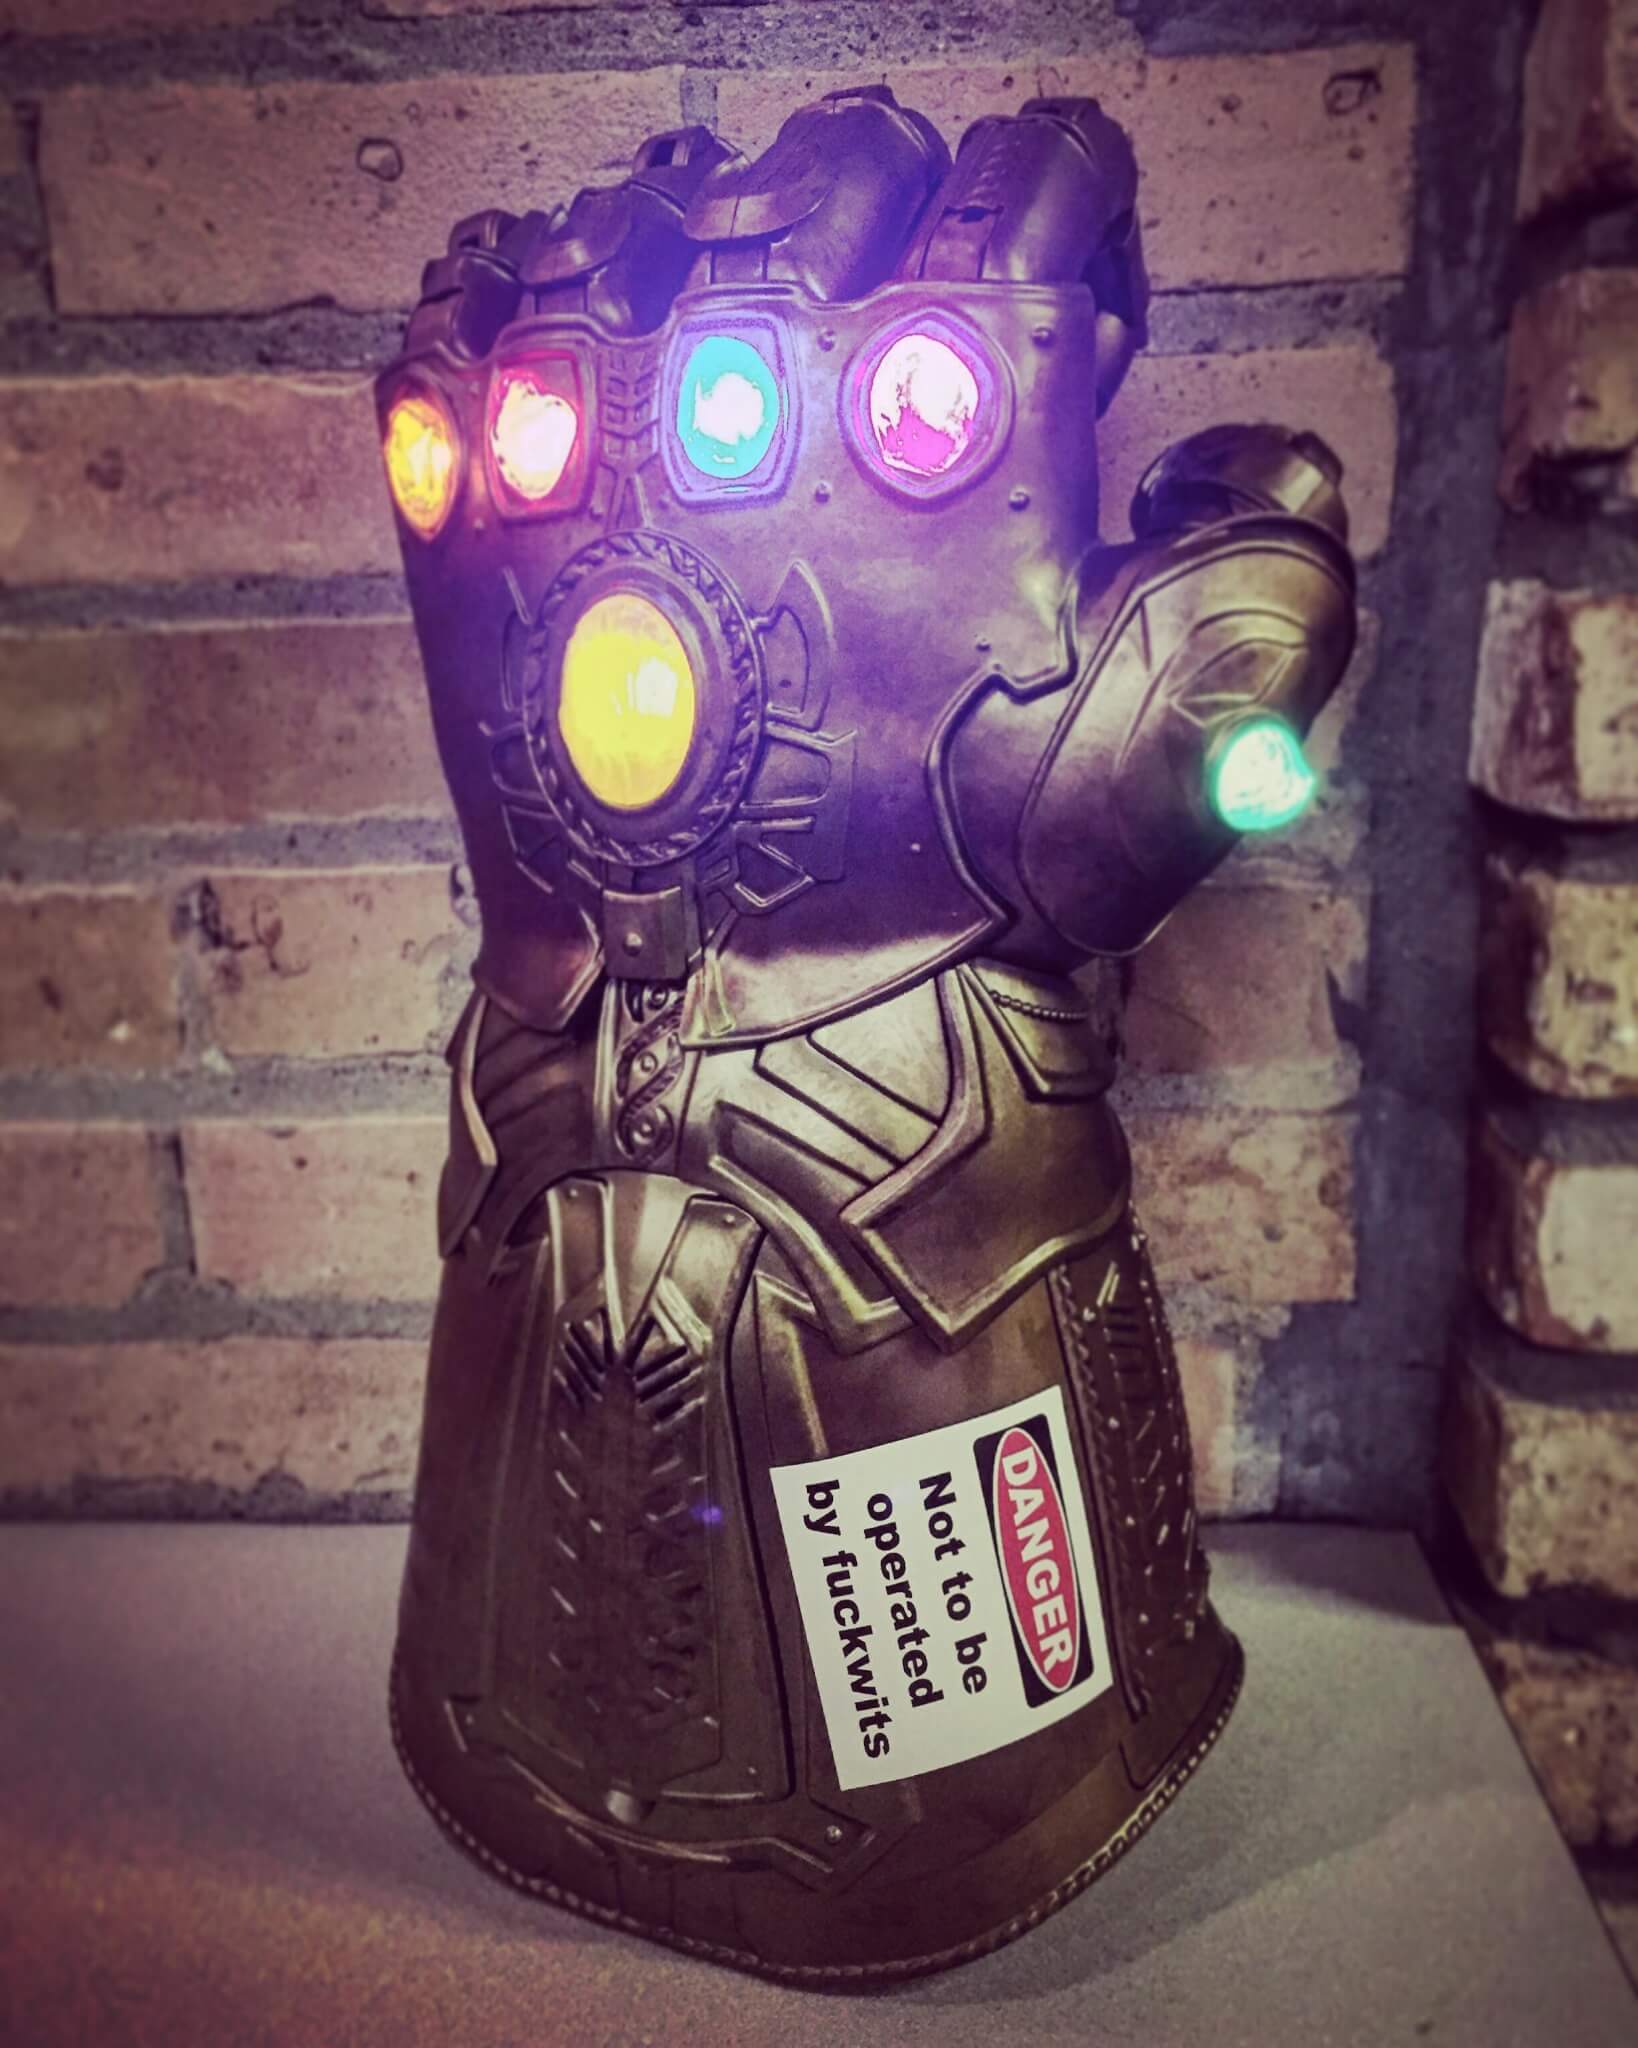 Infinity Gauntlet is not to be used by Fuckwits